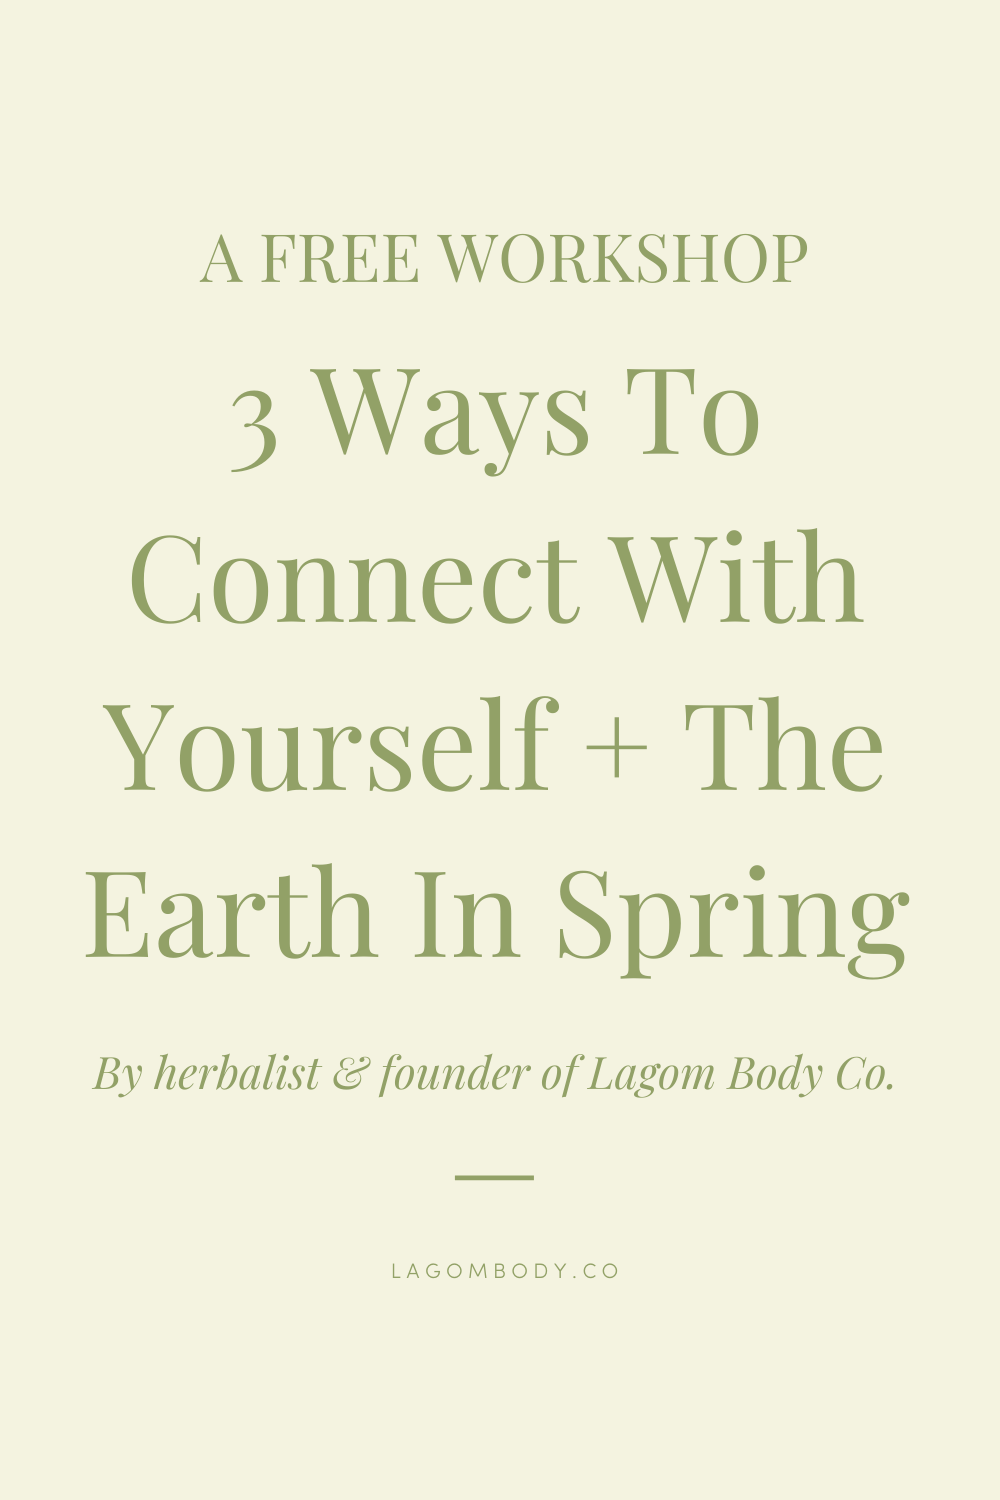 3 Ways To Connect With Yourself + The Earth This Spring: A Free Workshop